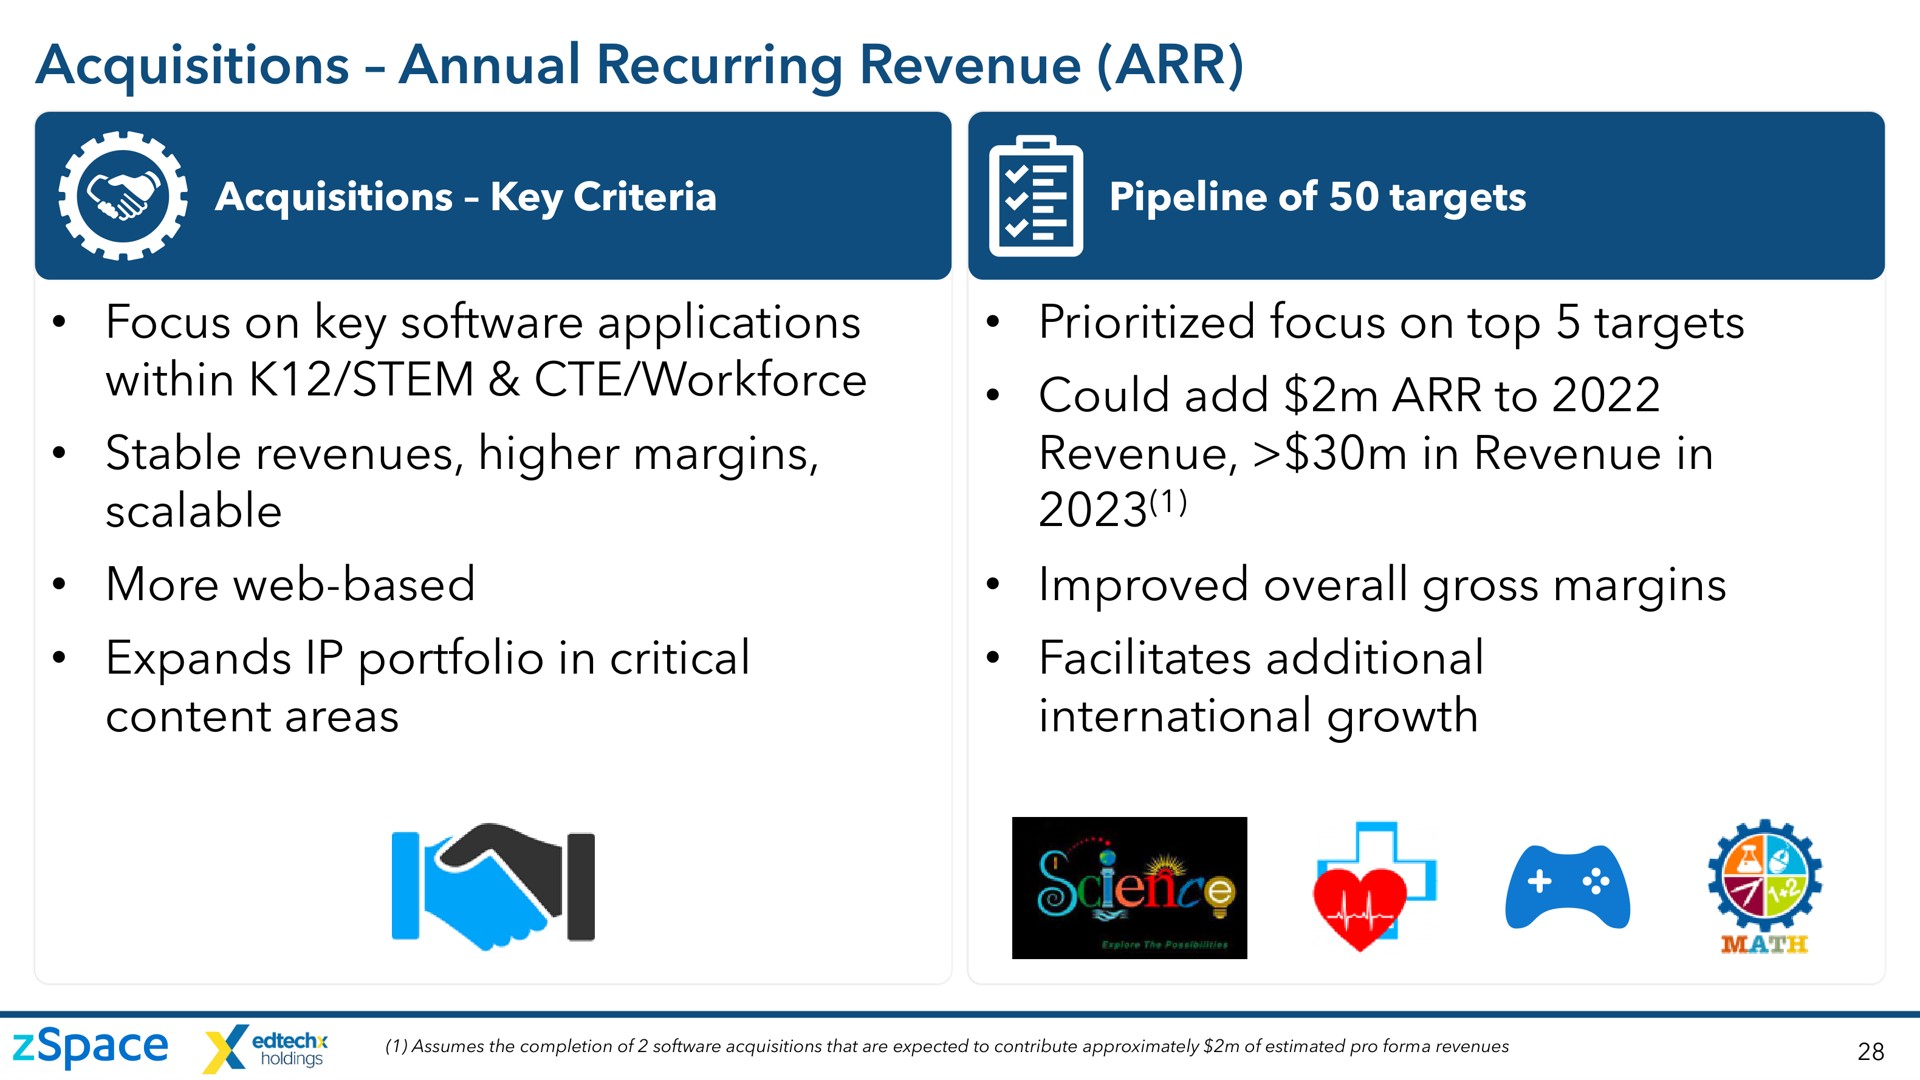 acquisitions annual recurring revenue focus on key applications within stem stable revenues higher margins scalable more web based expands portfolio in critical content areas focus on top targets could add to revenue in revenue in improved overall gross margins facilitates additional international growth | zSpace